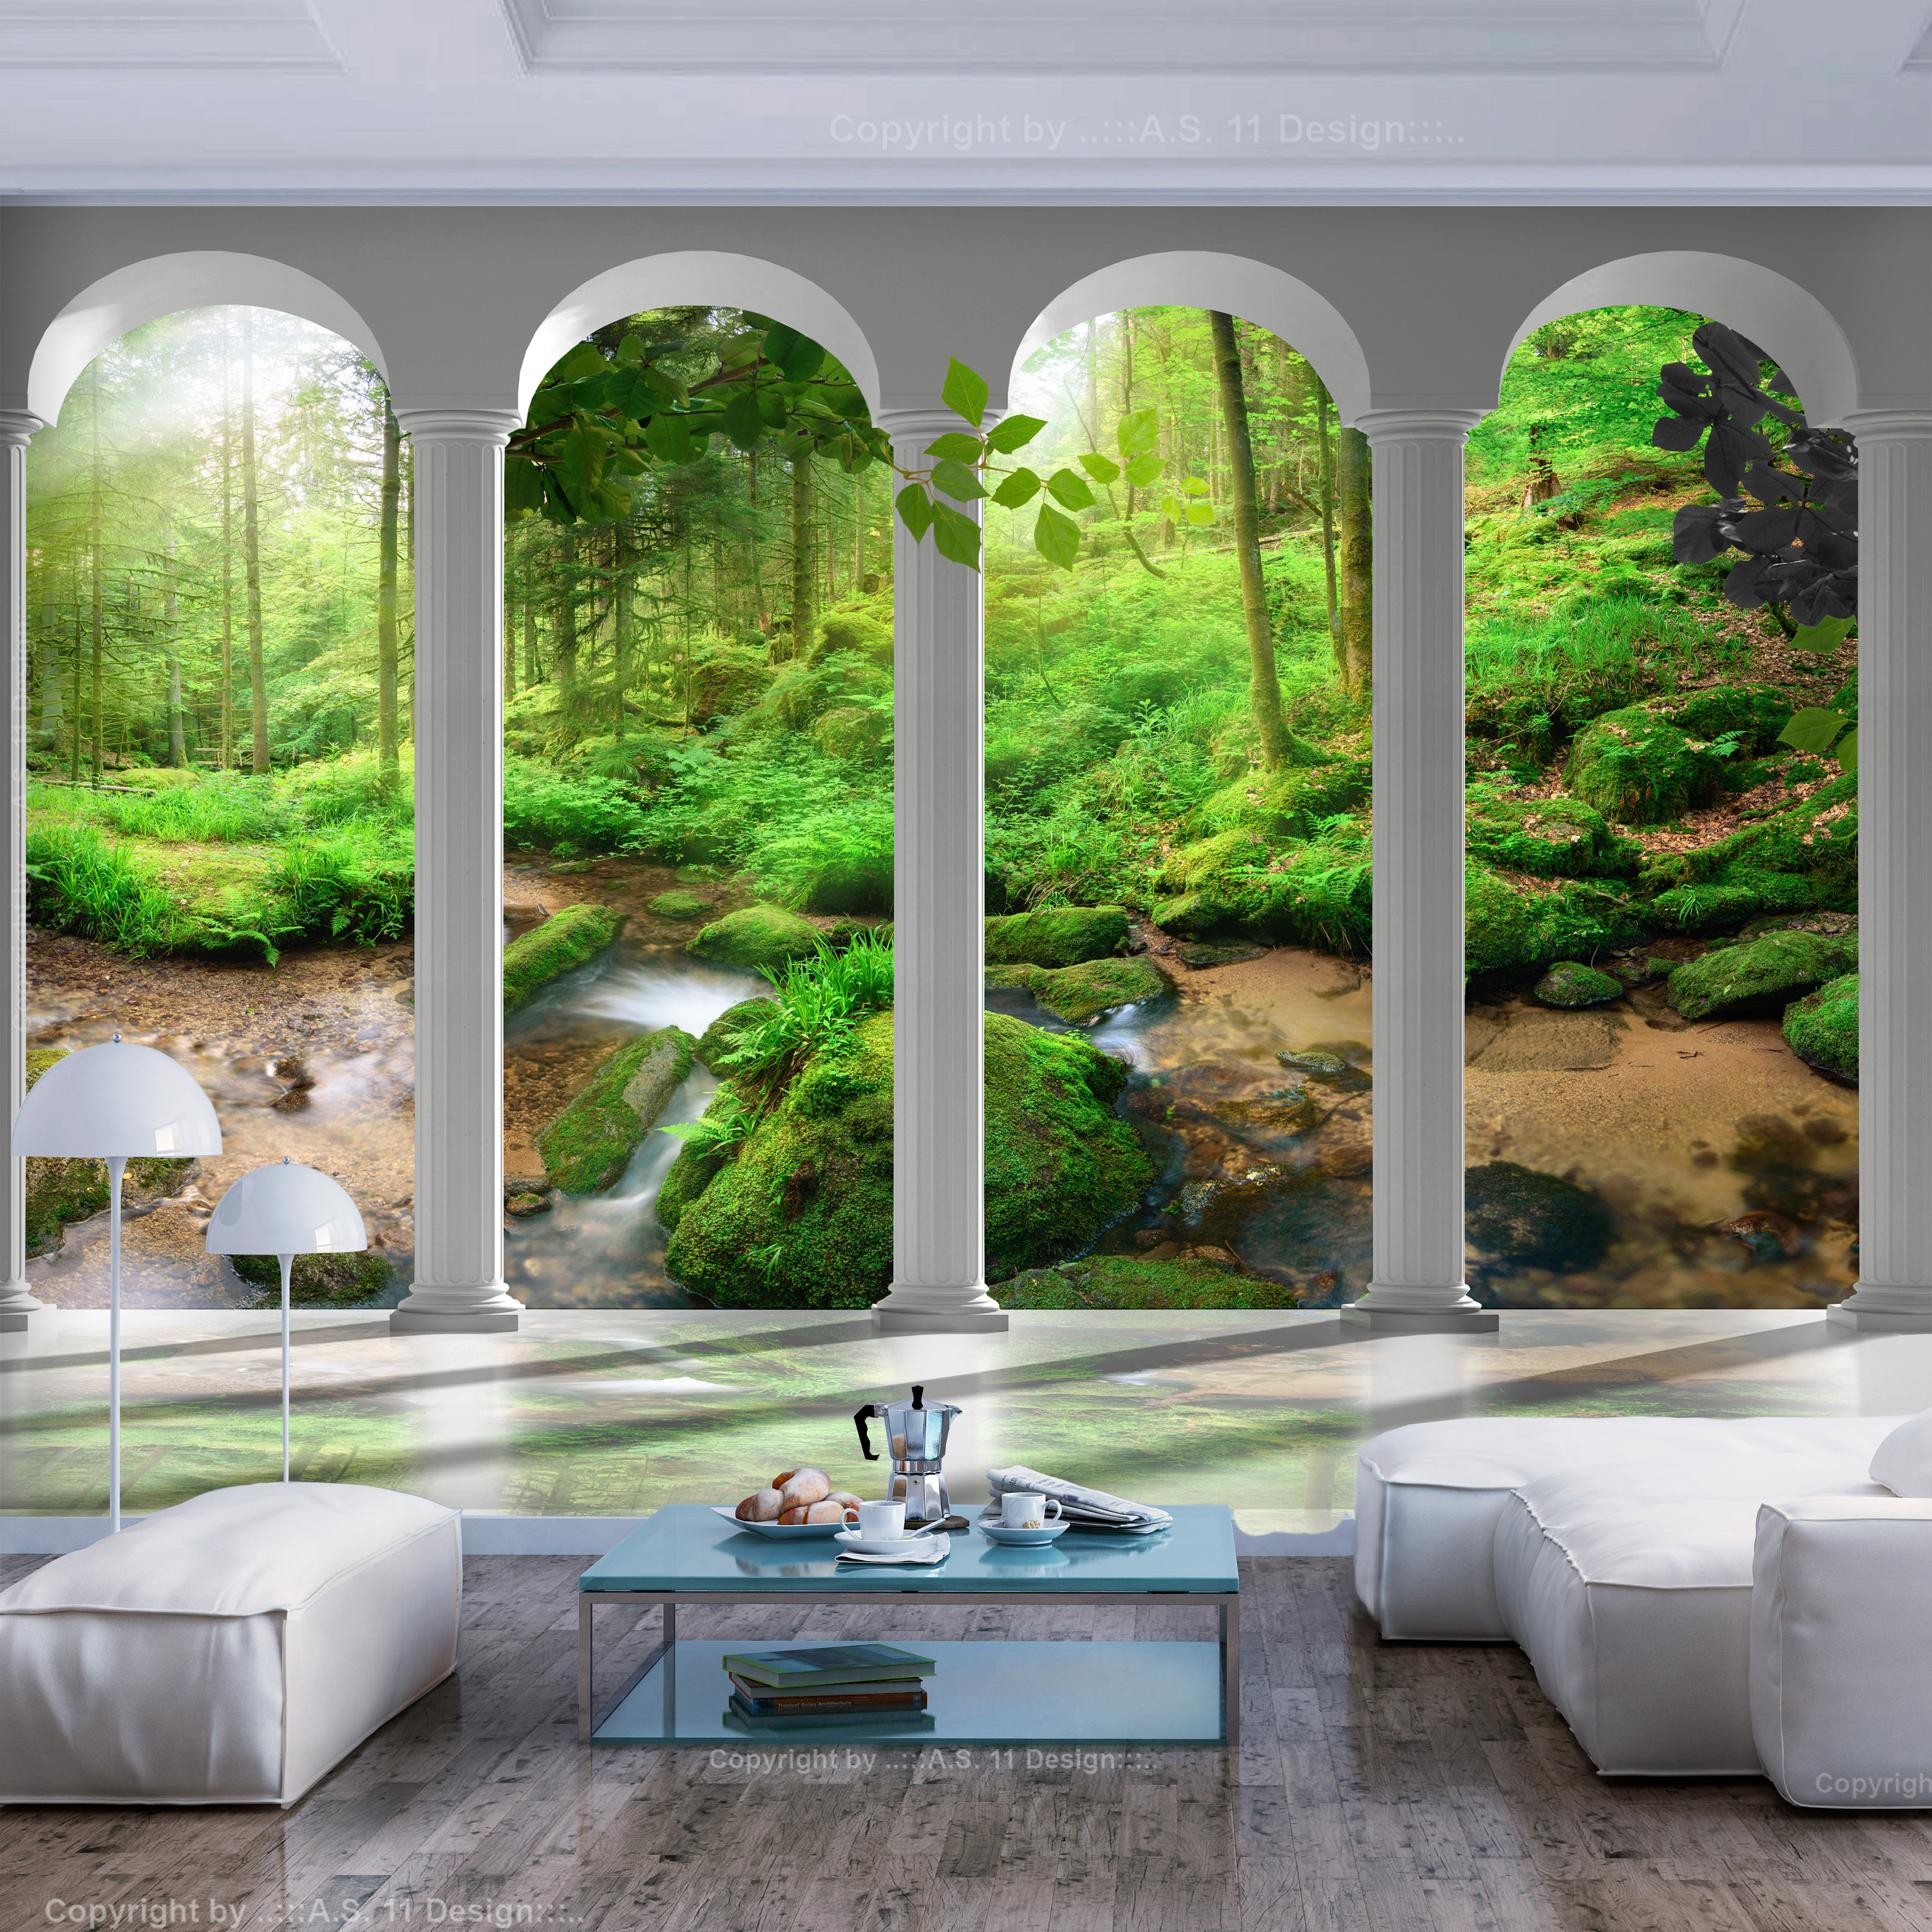 Self-adhesive Wallpaper - Pillars and Forest - 245x175